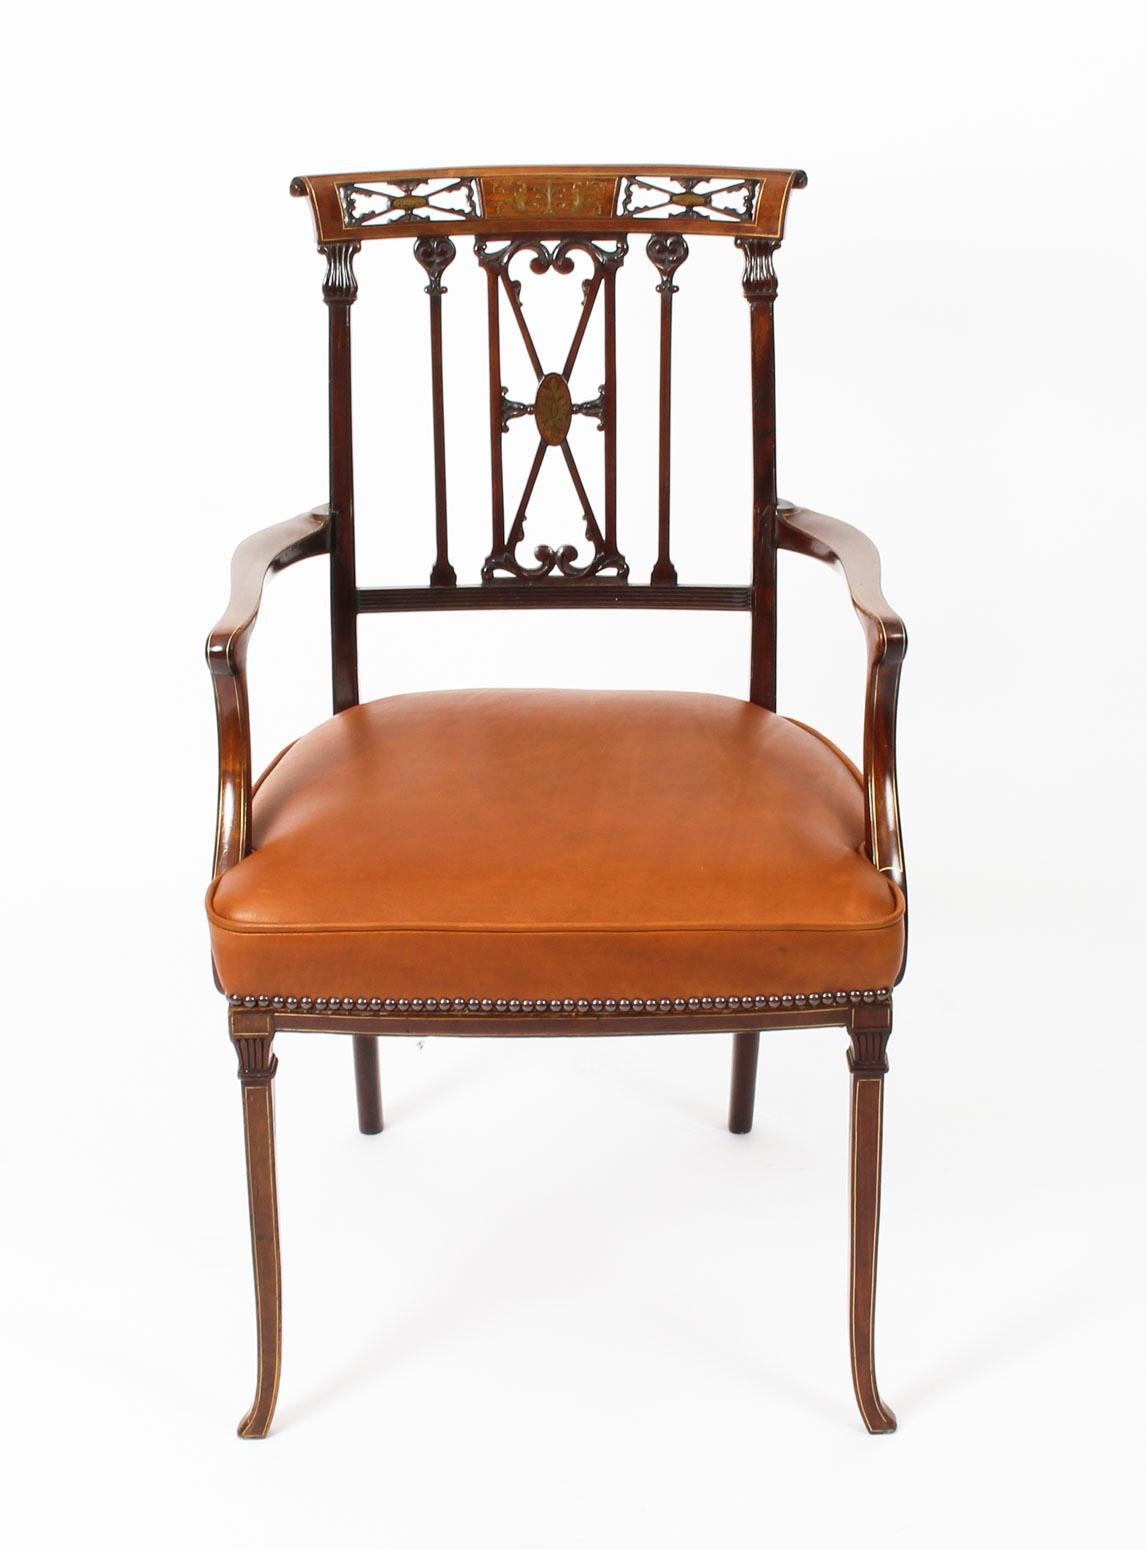 This is a beautiful late Victorian antique mahogany brass and boxwood inlaid open armchair, circa 1880 in date.

The scroll top rail has been centred with a stunning brass inlaid panel flanked by a pair of pierced foliate panels. It has a scroll